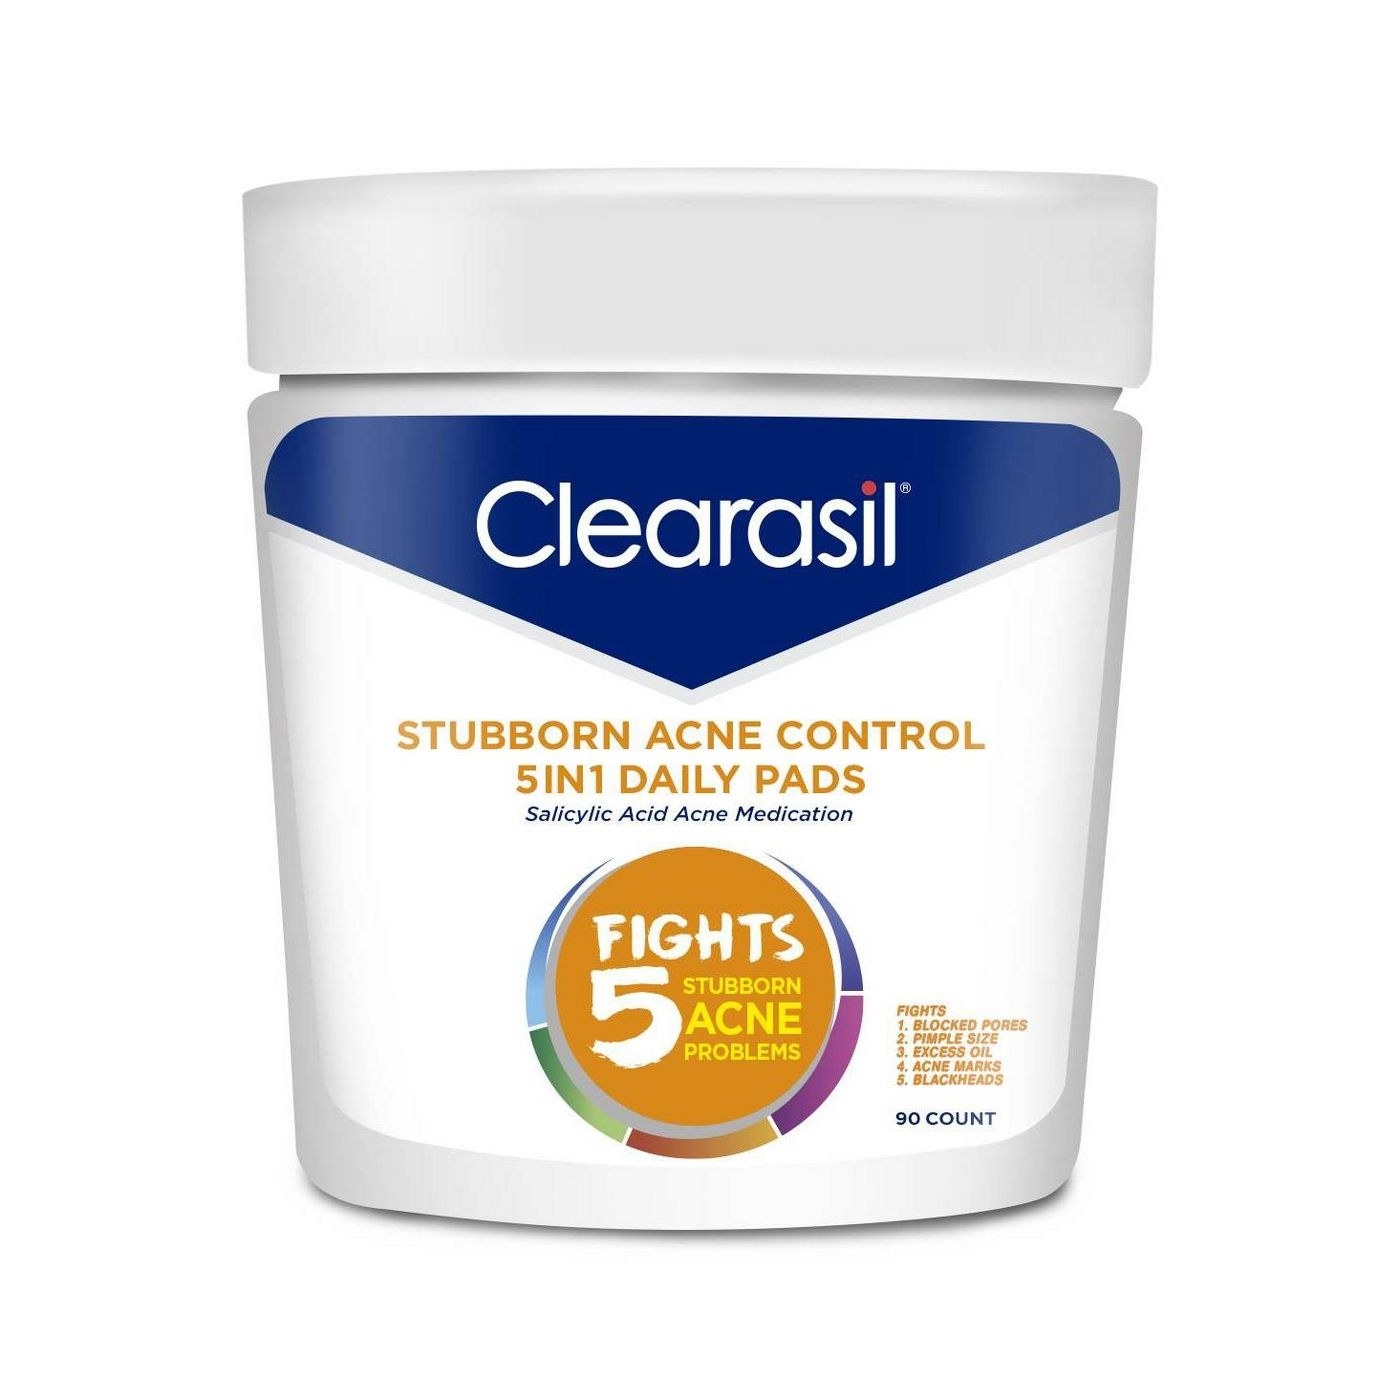 The Clearasil five-in-one daily acne control pad